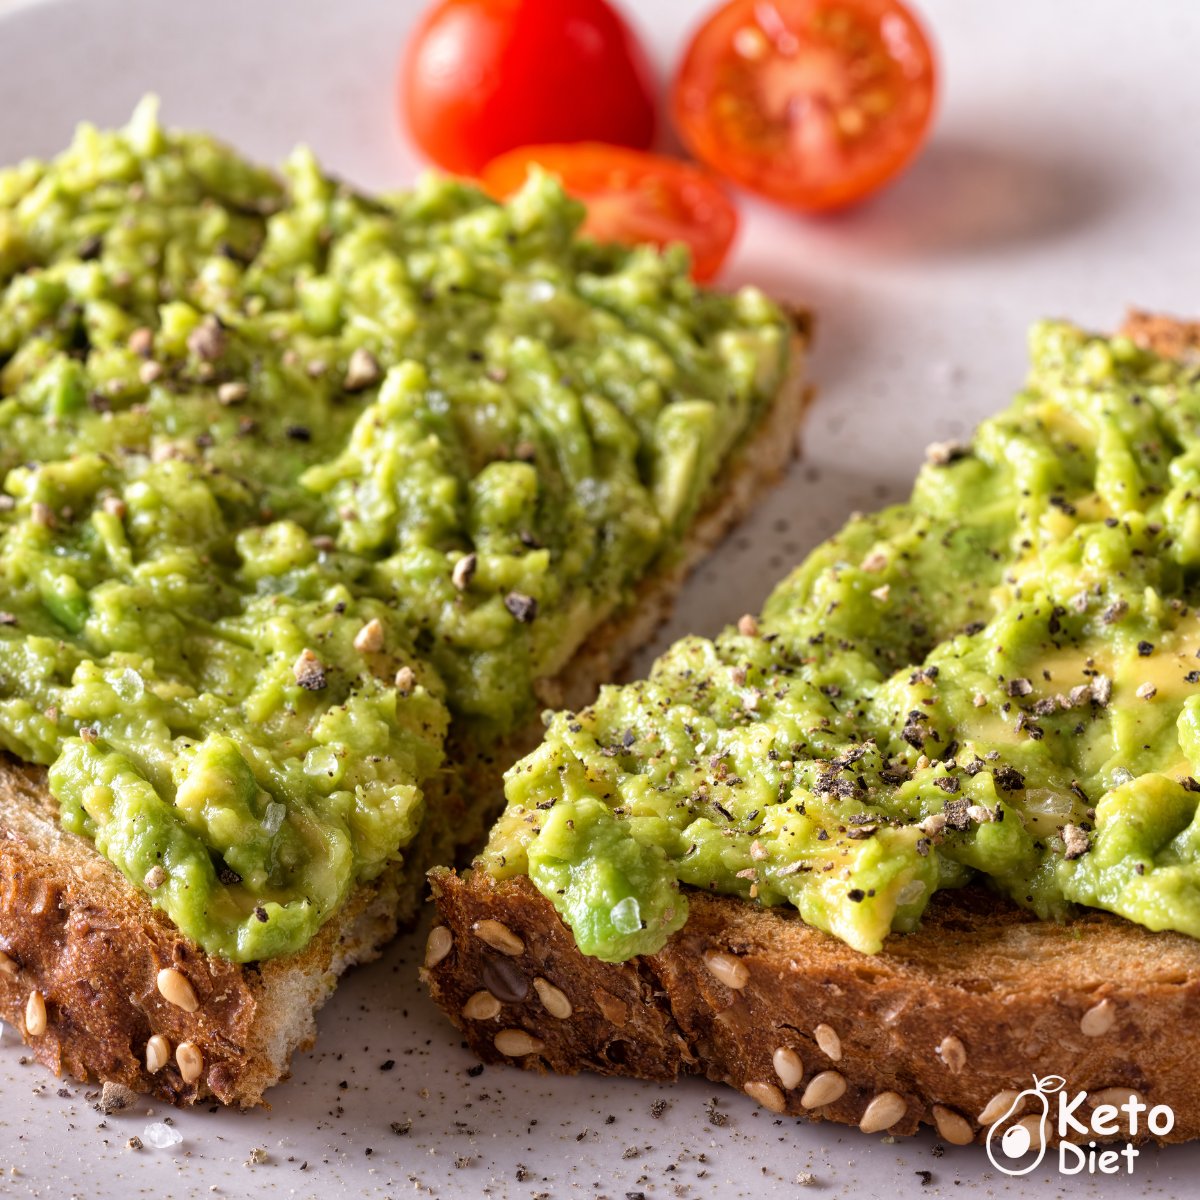 Here are some delicious Keto meal ideas. Let us know which one you prefer the most! 😍⁠⠀⁠ 𝟭. Cauliflower Steaks⁠ 𝟮. Low-Carb Avocado Toast⁠